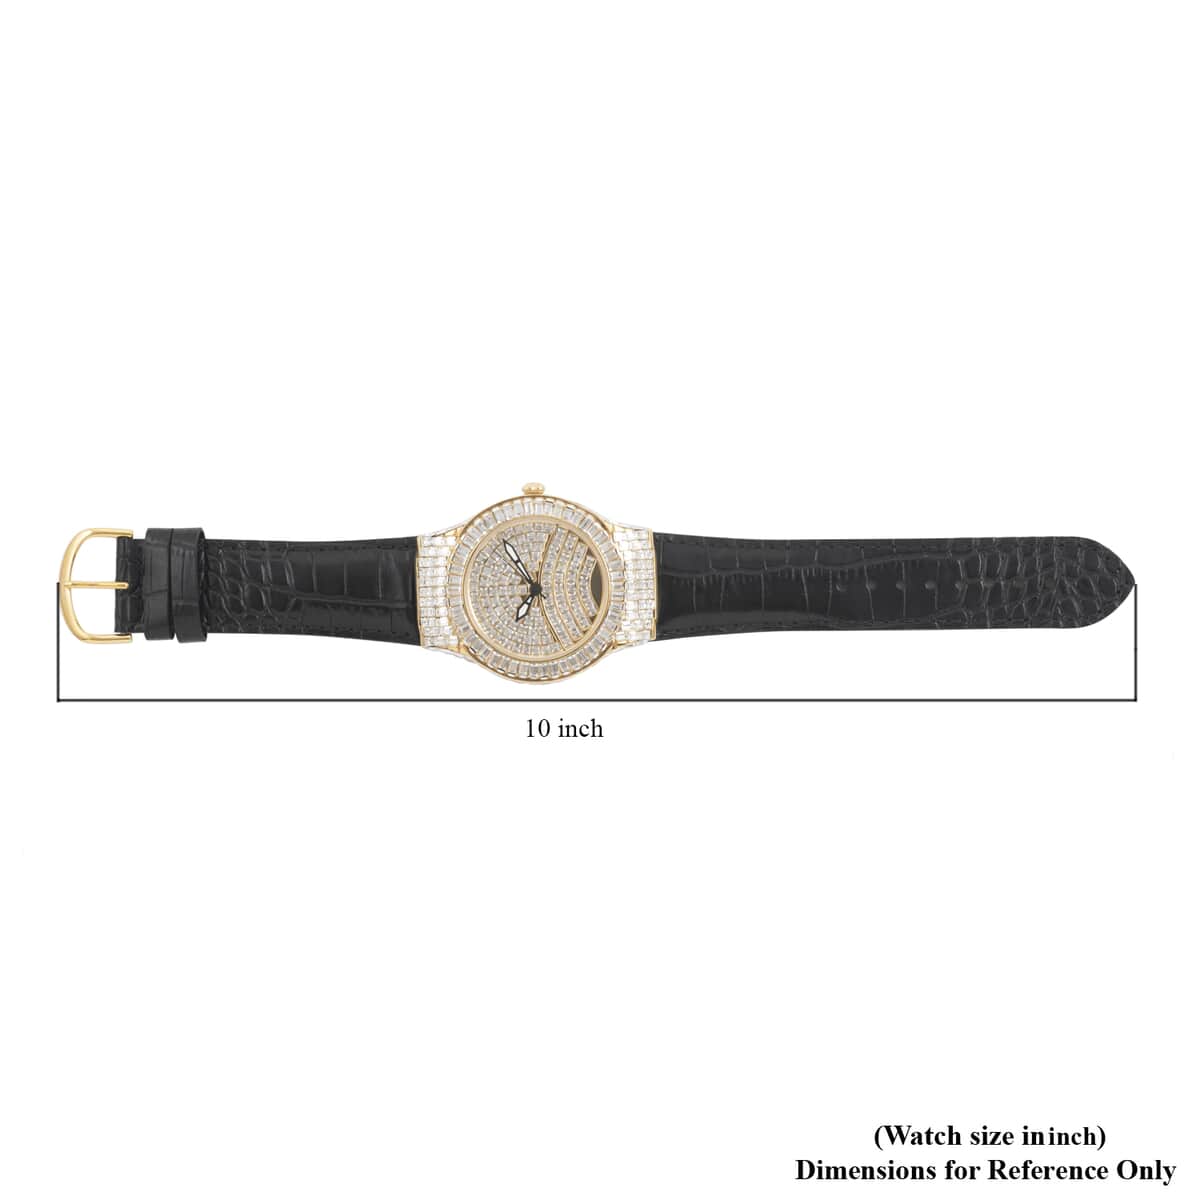 Adee Kaye Austrian Crystal Japan Quartz Movement Goldtone Dial Watch in Black Leather Band (26 mm) | Best Watch for Women | Designer Women's Wrist Watch image number 5